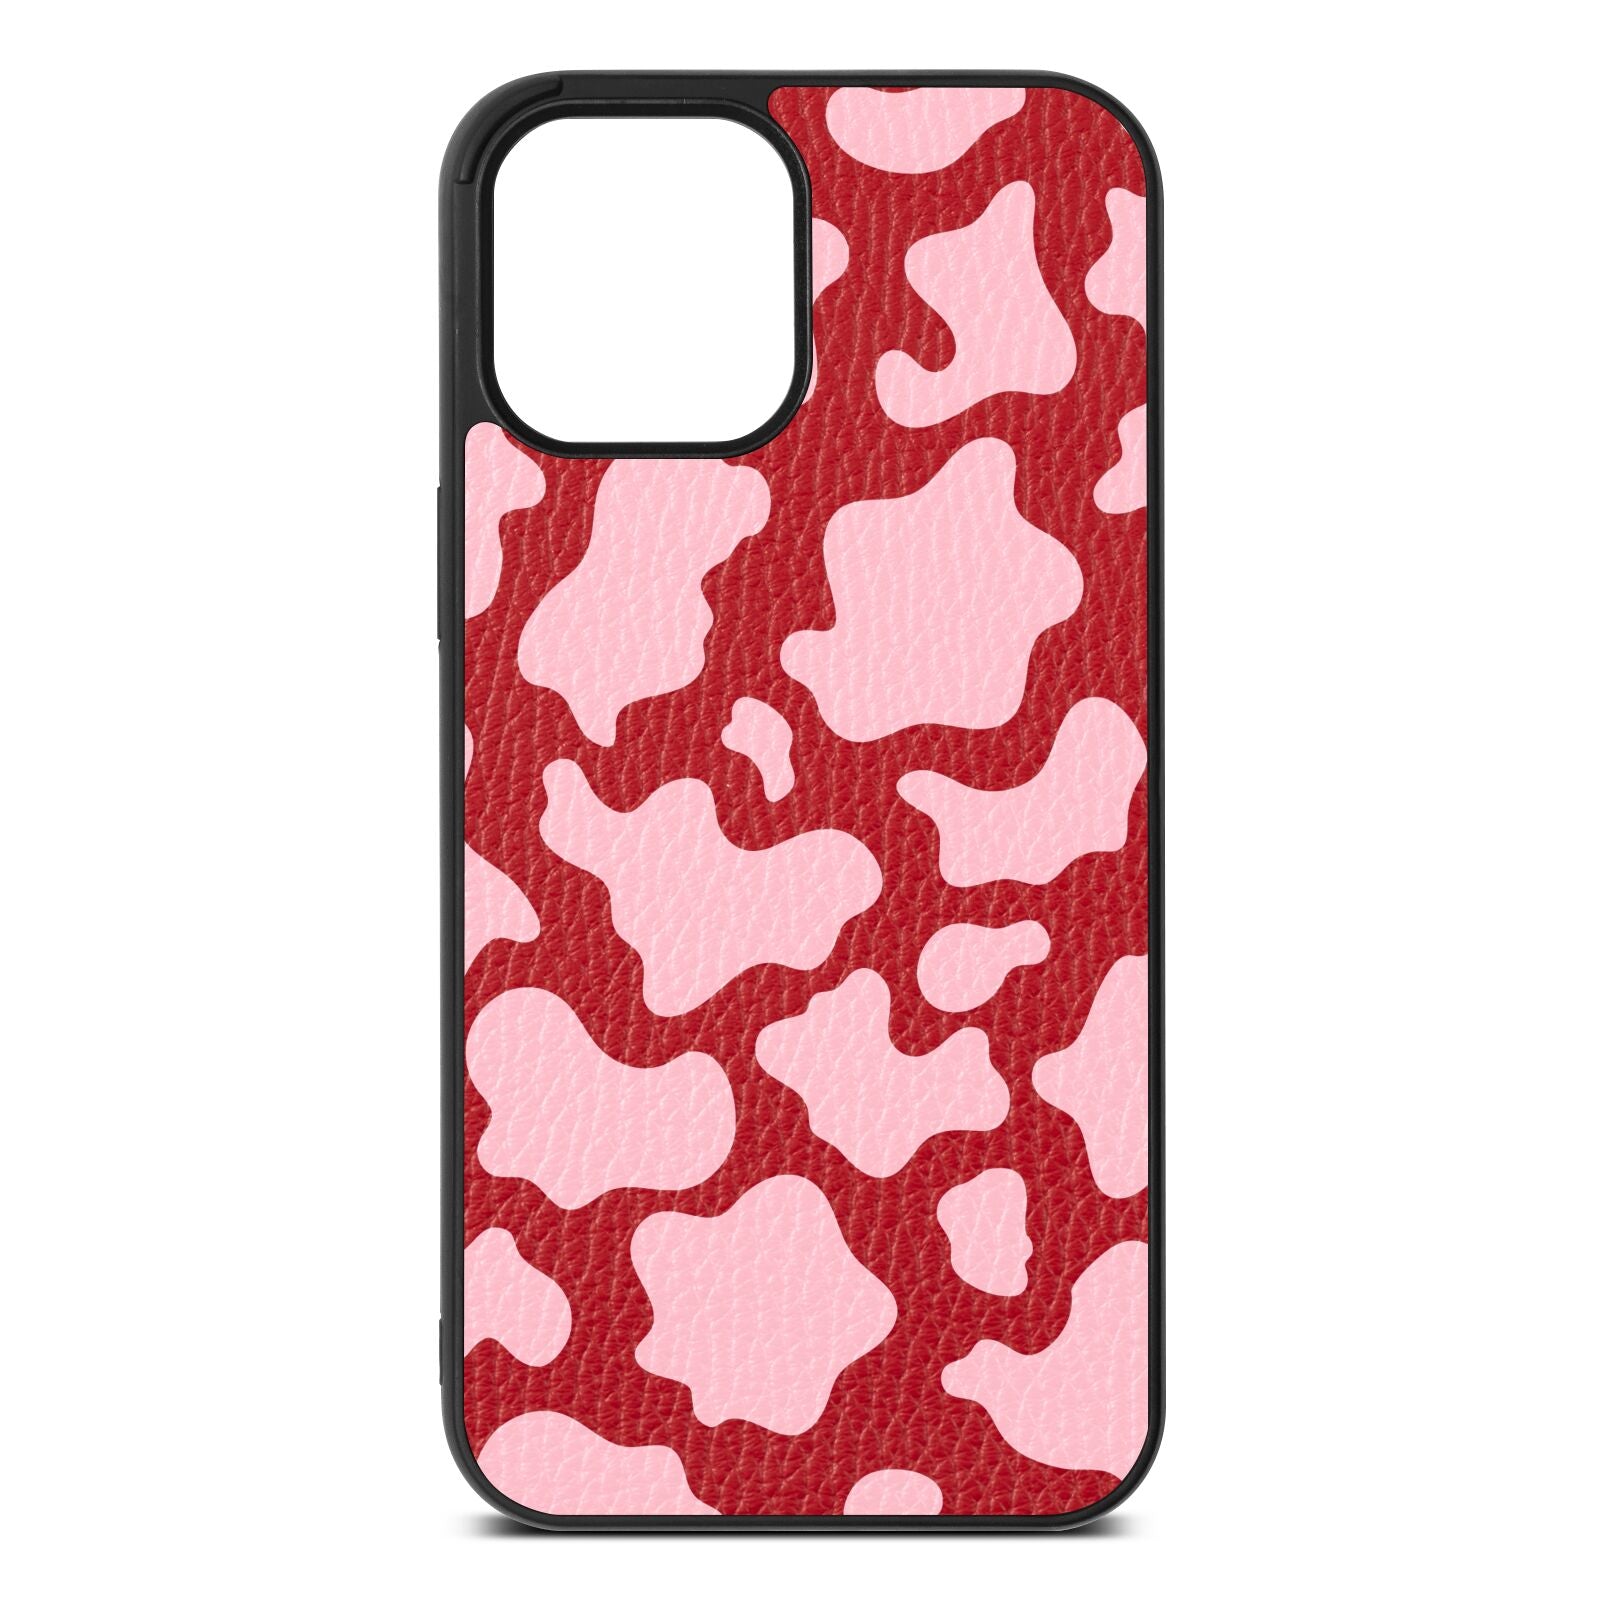 Pink Cow Print Red Pebble Leather iPhone 12 Pro Max Case